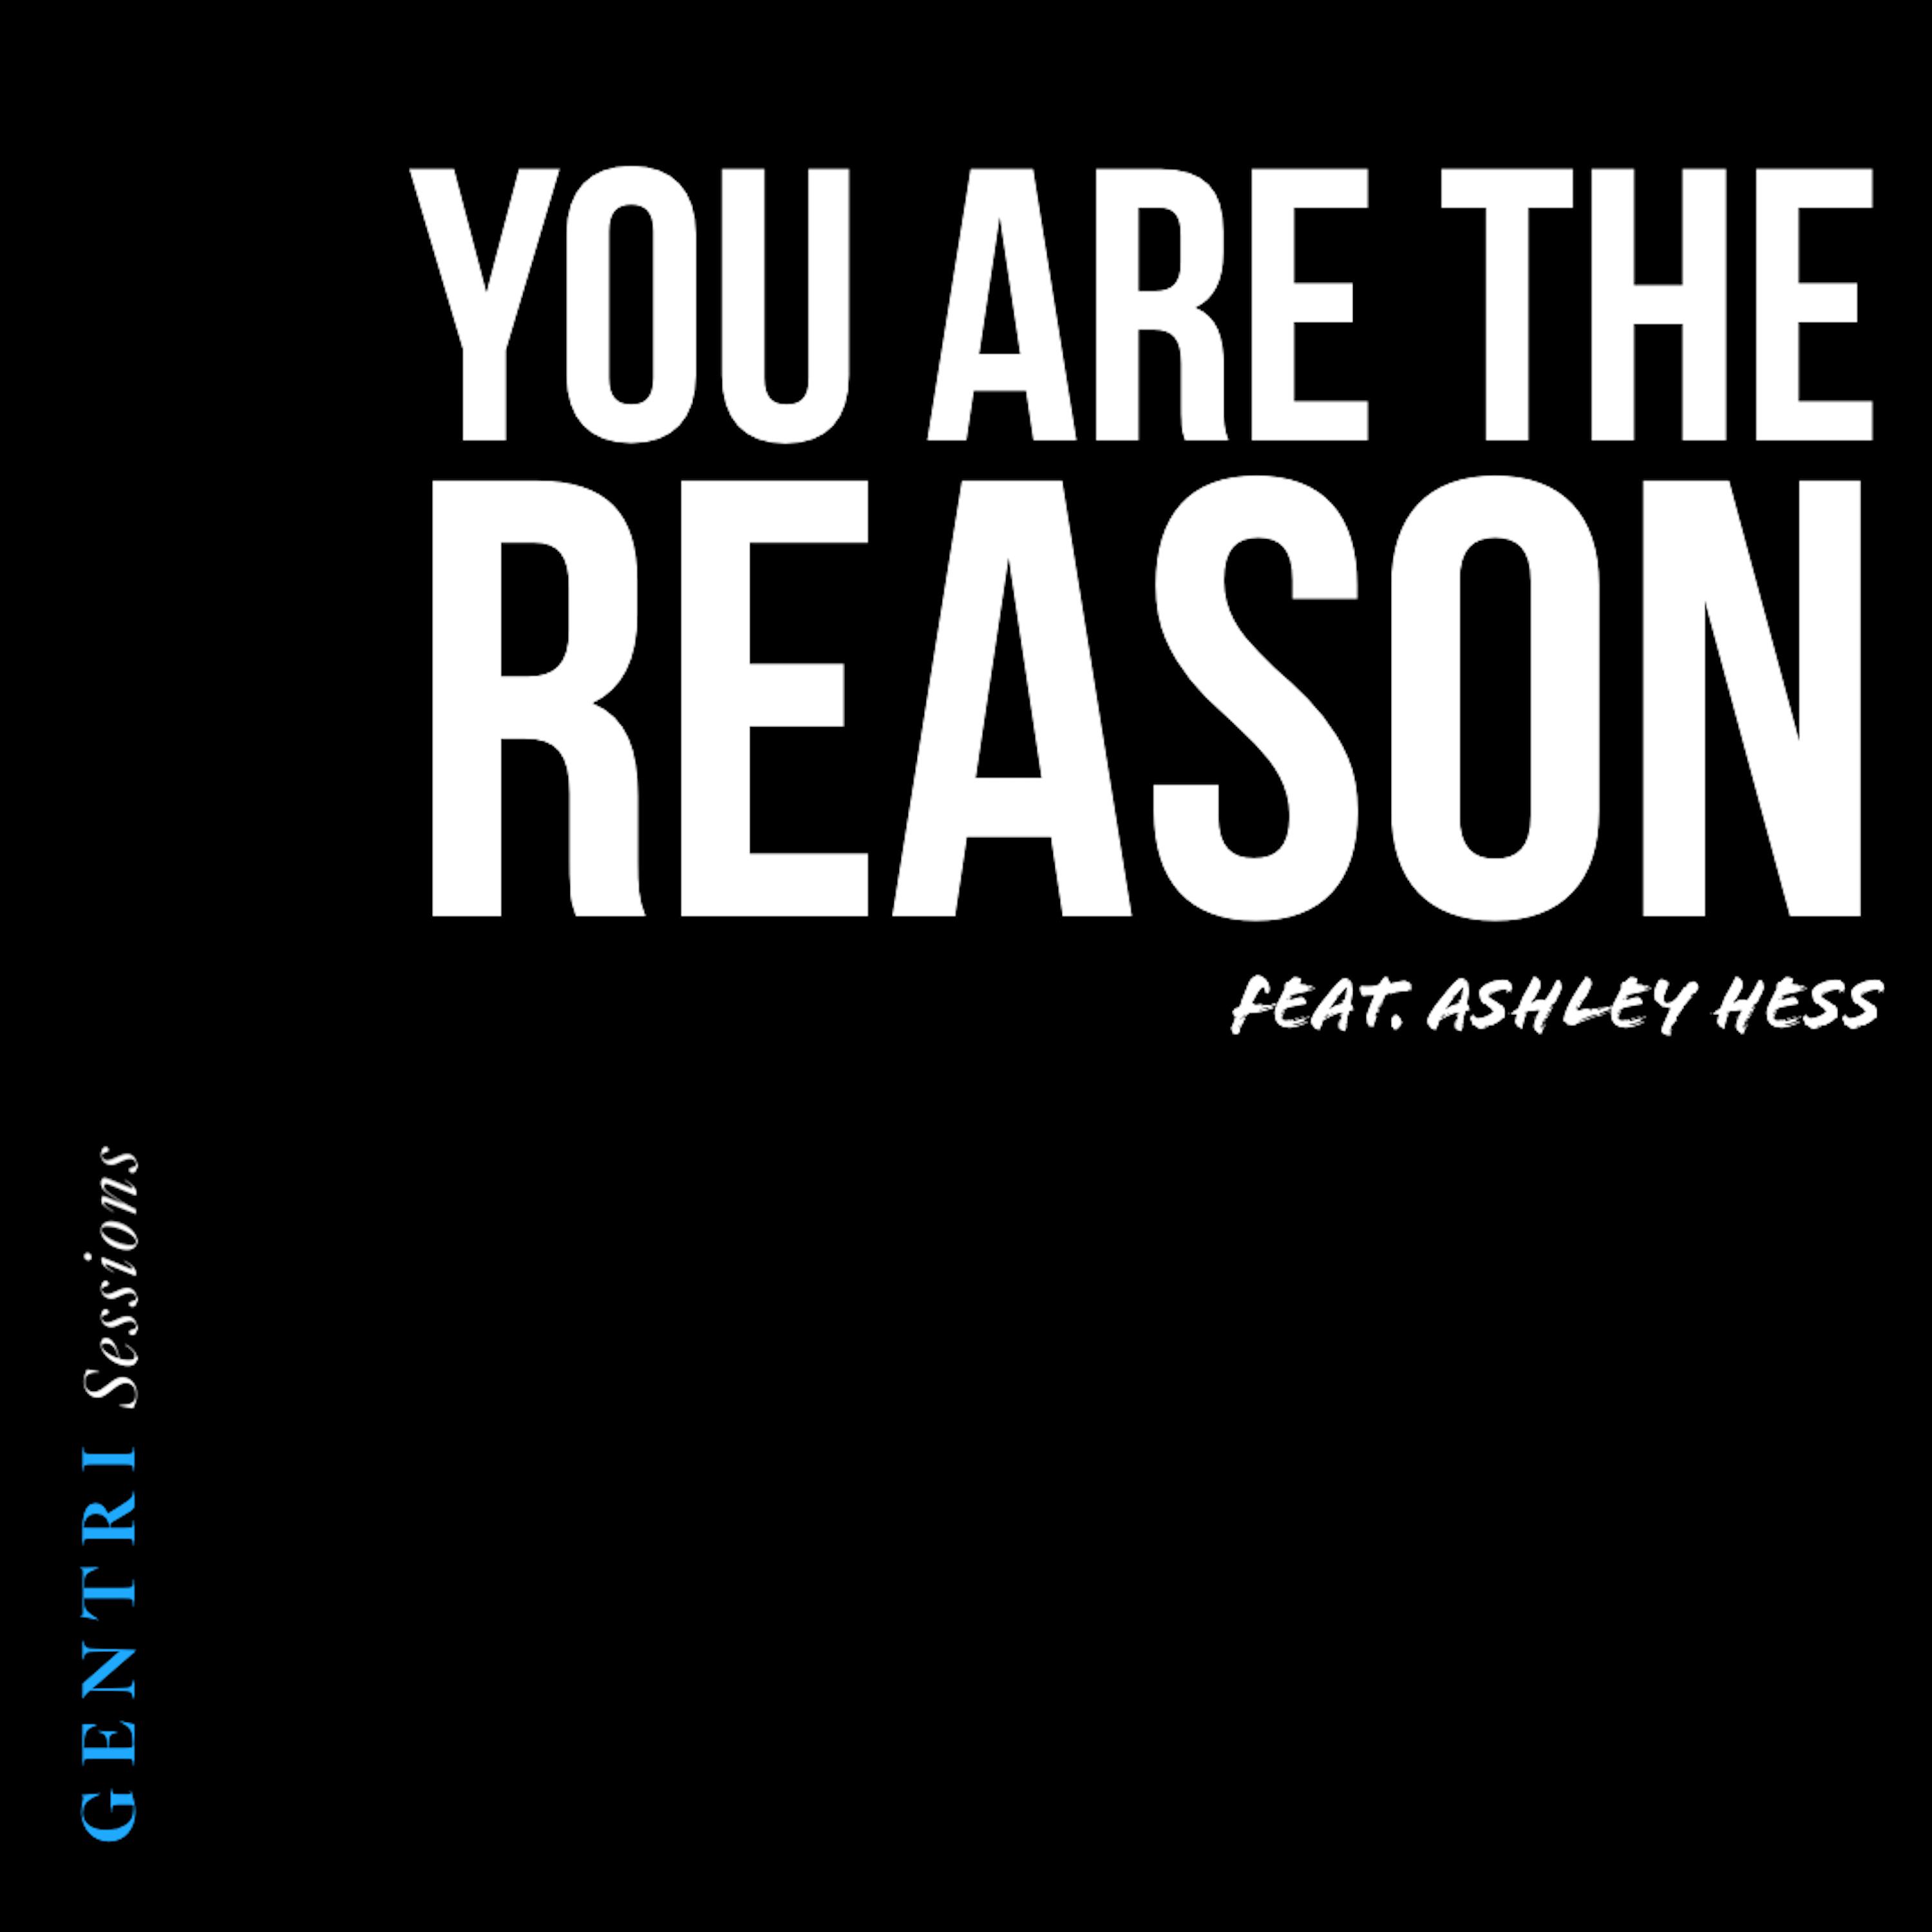 GENTRI - You Are the Reason (Live Studio Version) [feat. Ashley Hess]